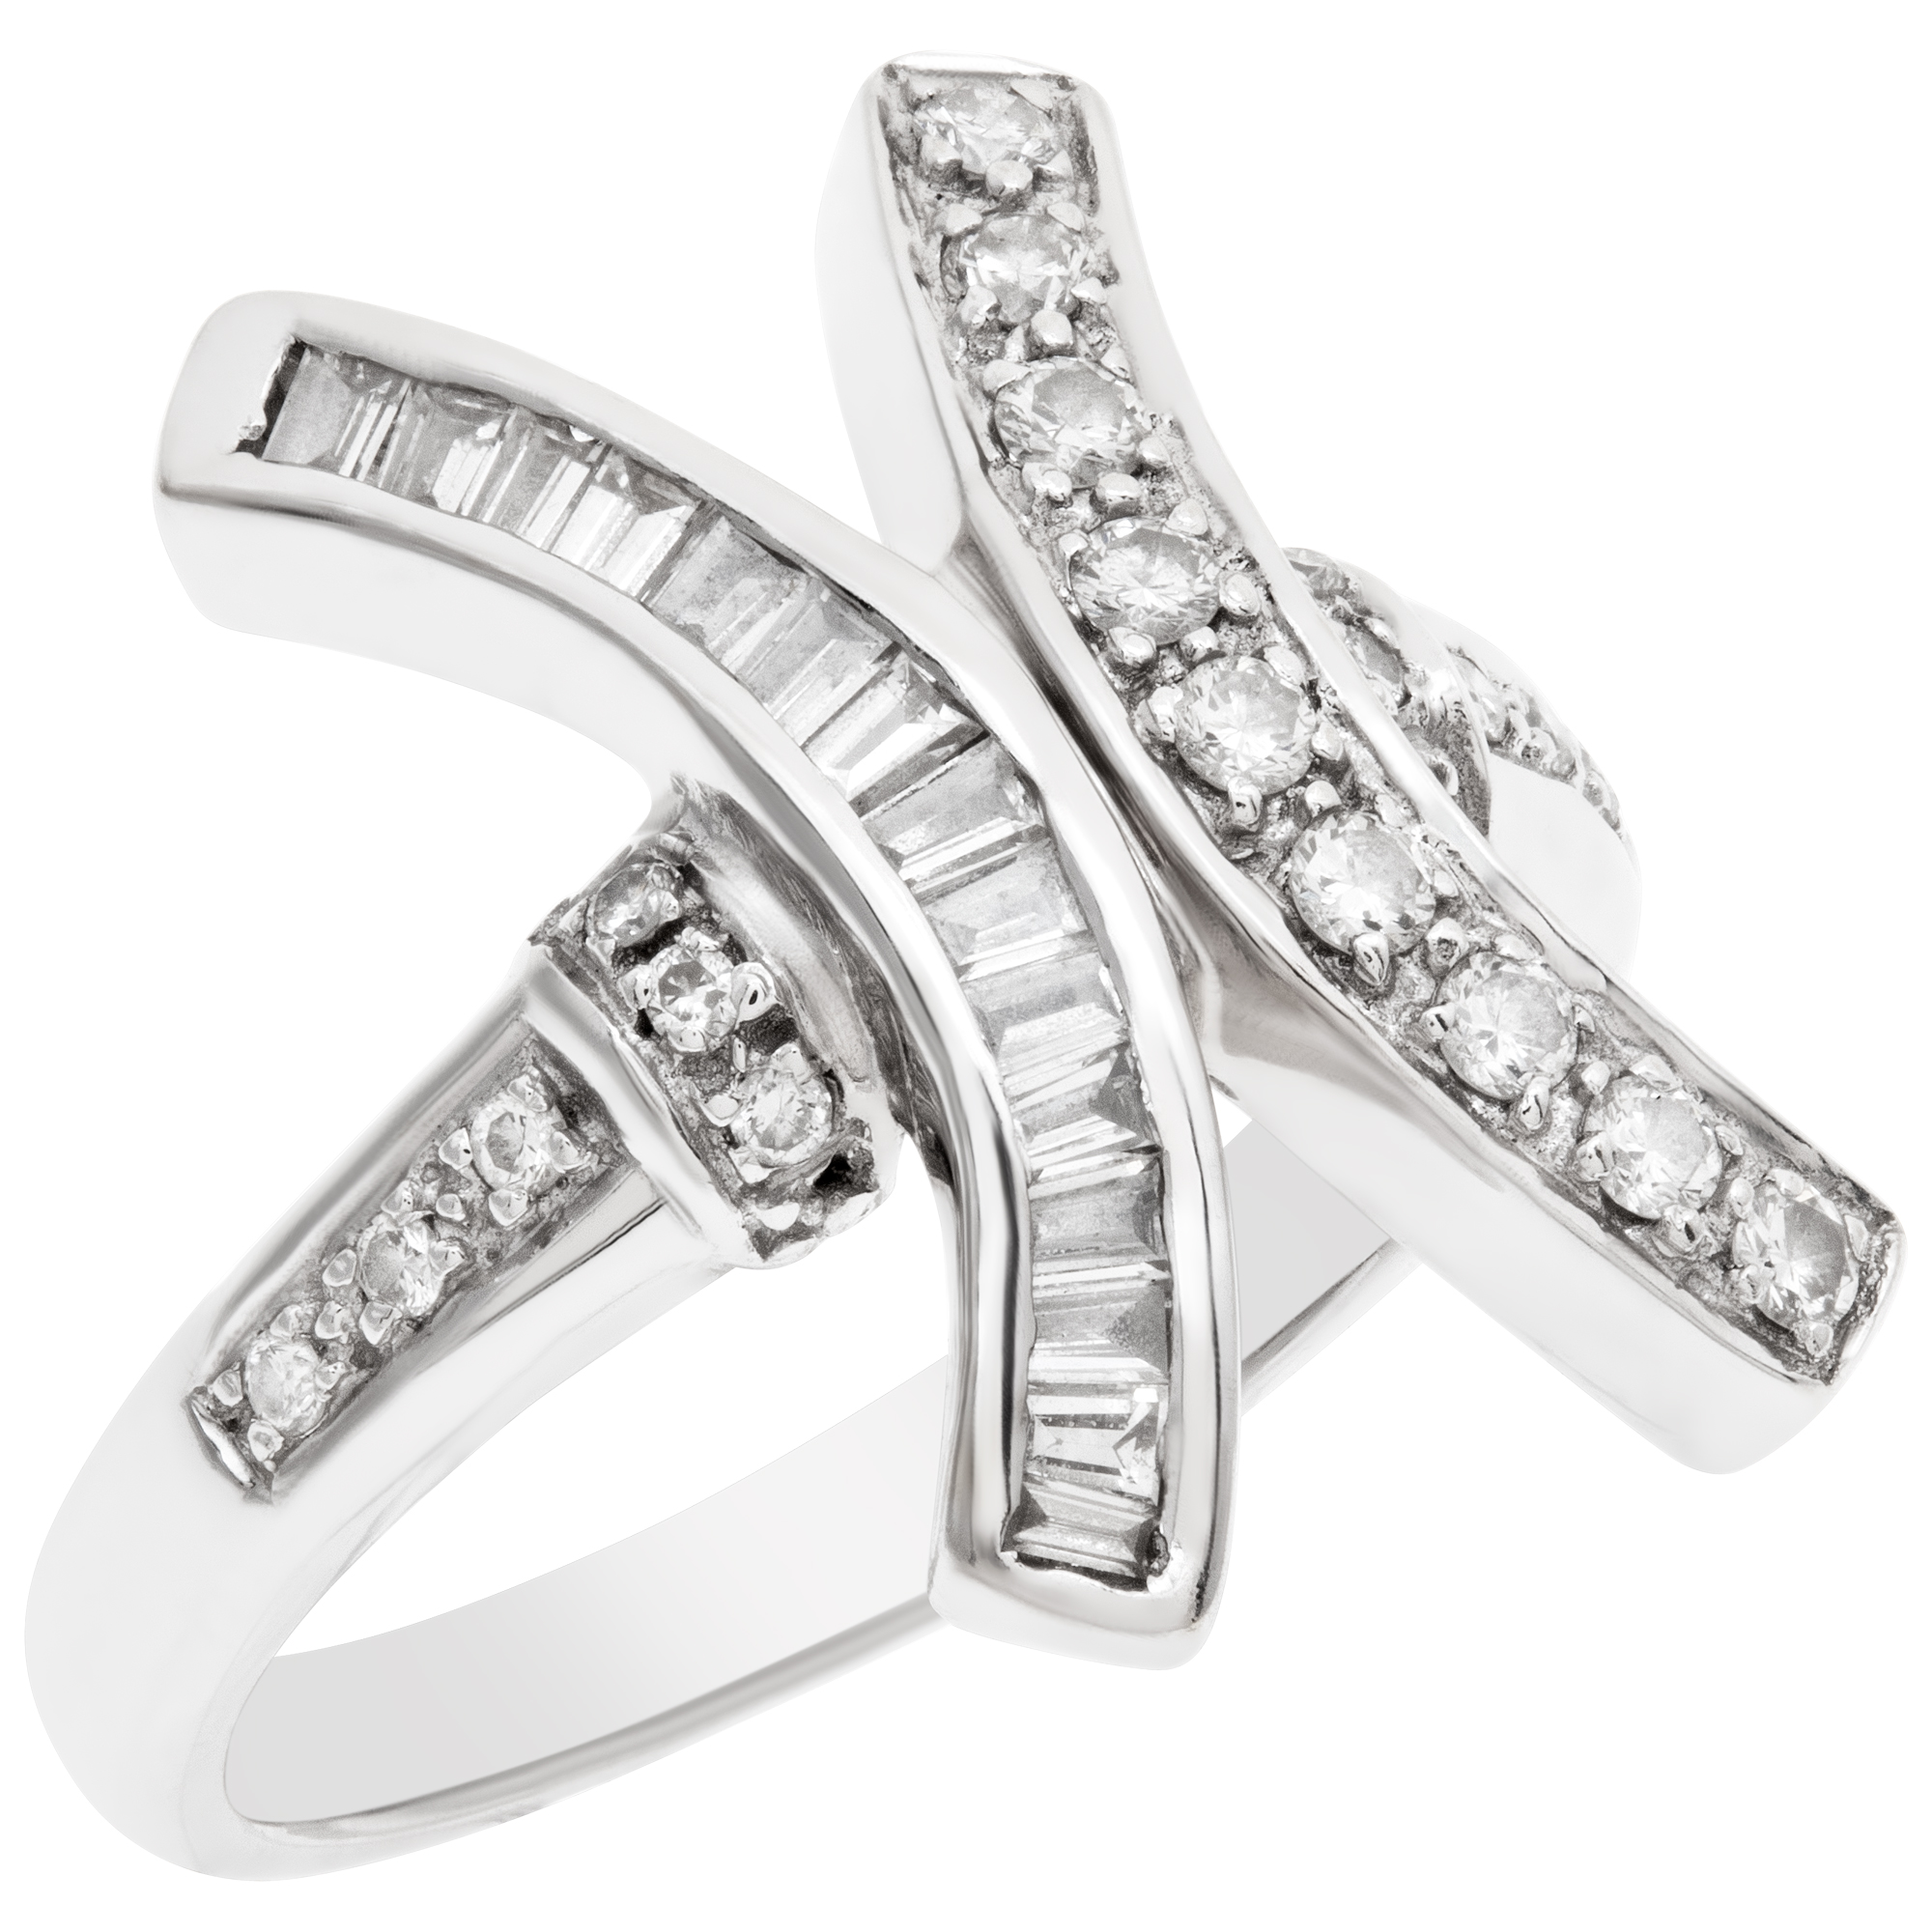 "X" shaped diamond ring in 18k white gold. 0.30 carats in diamonds. size 6 image 3